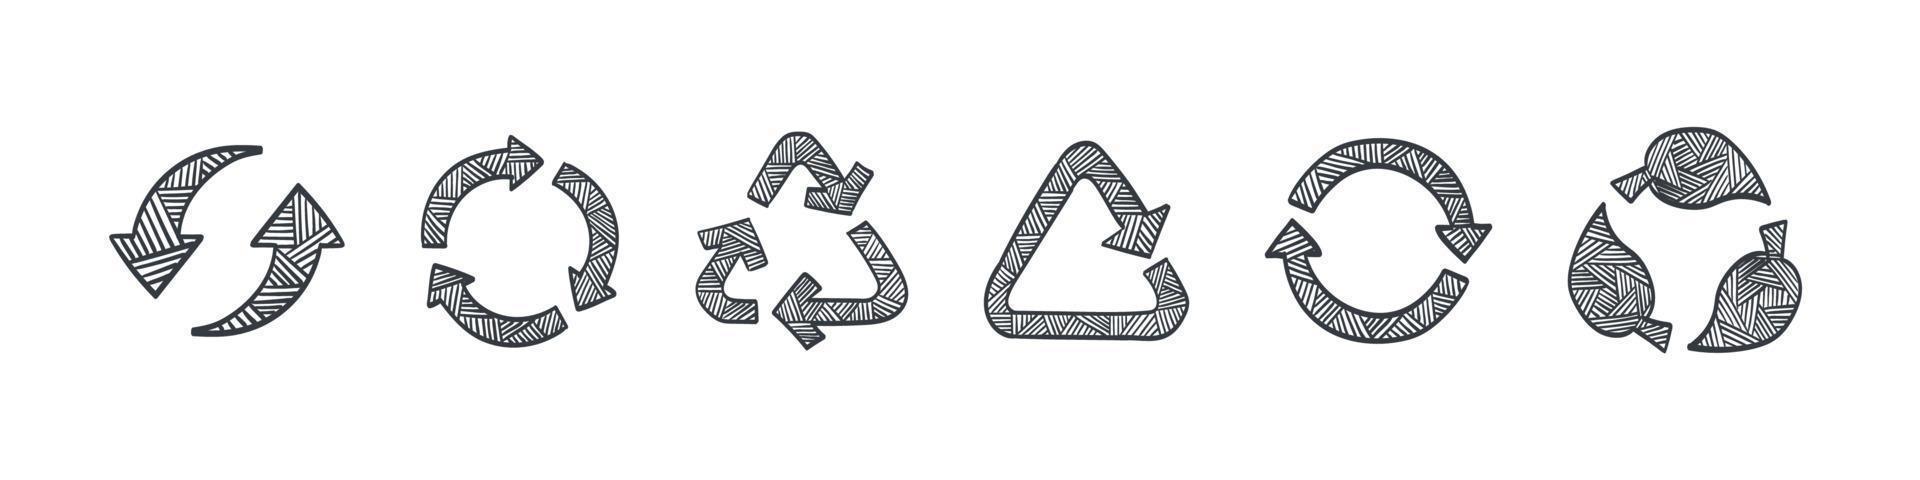 Recycling icons set. Recycling arrows. Drawn icons of the recycling. Vector illustration